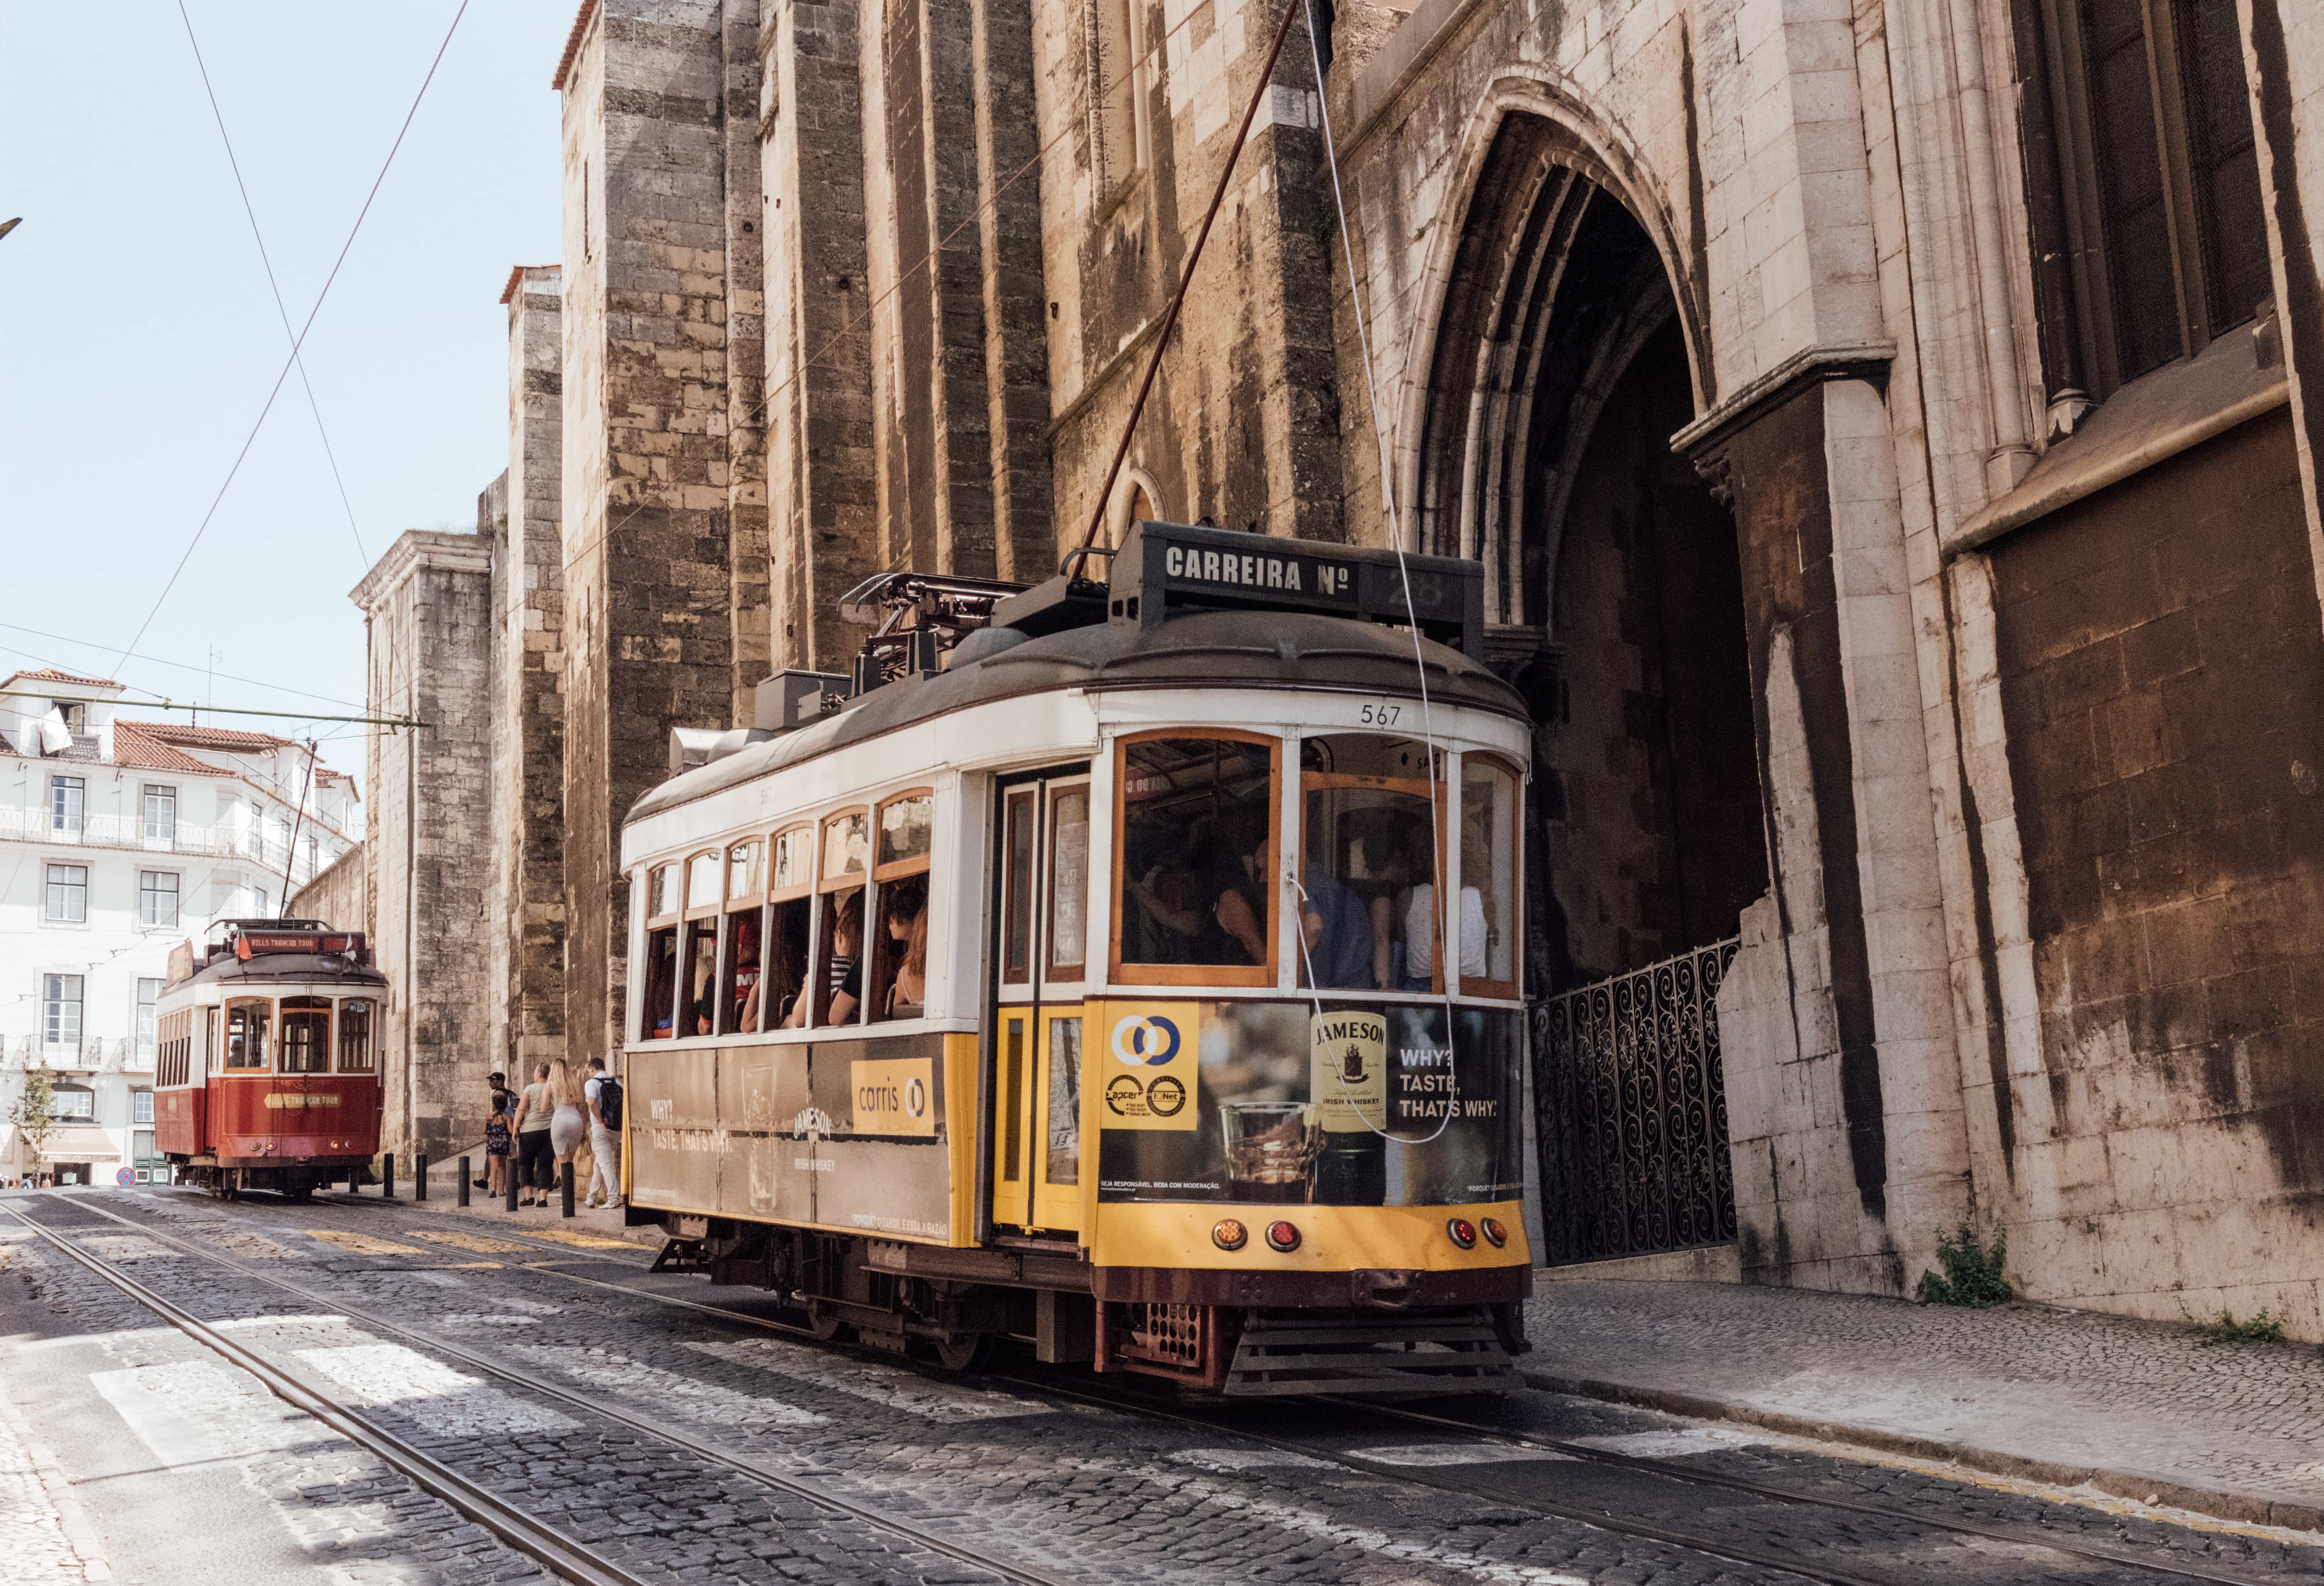 Daily budget in Lisbon, things to do in Lisbon,   places to visit in Lisbon, best time to visit Lisbon,   best food to try in Lisbon